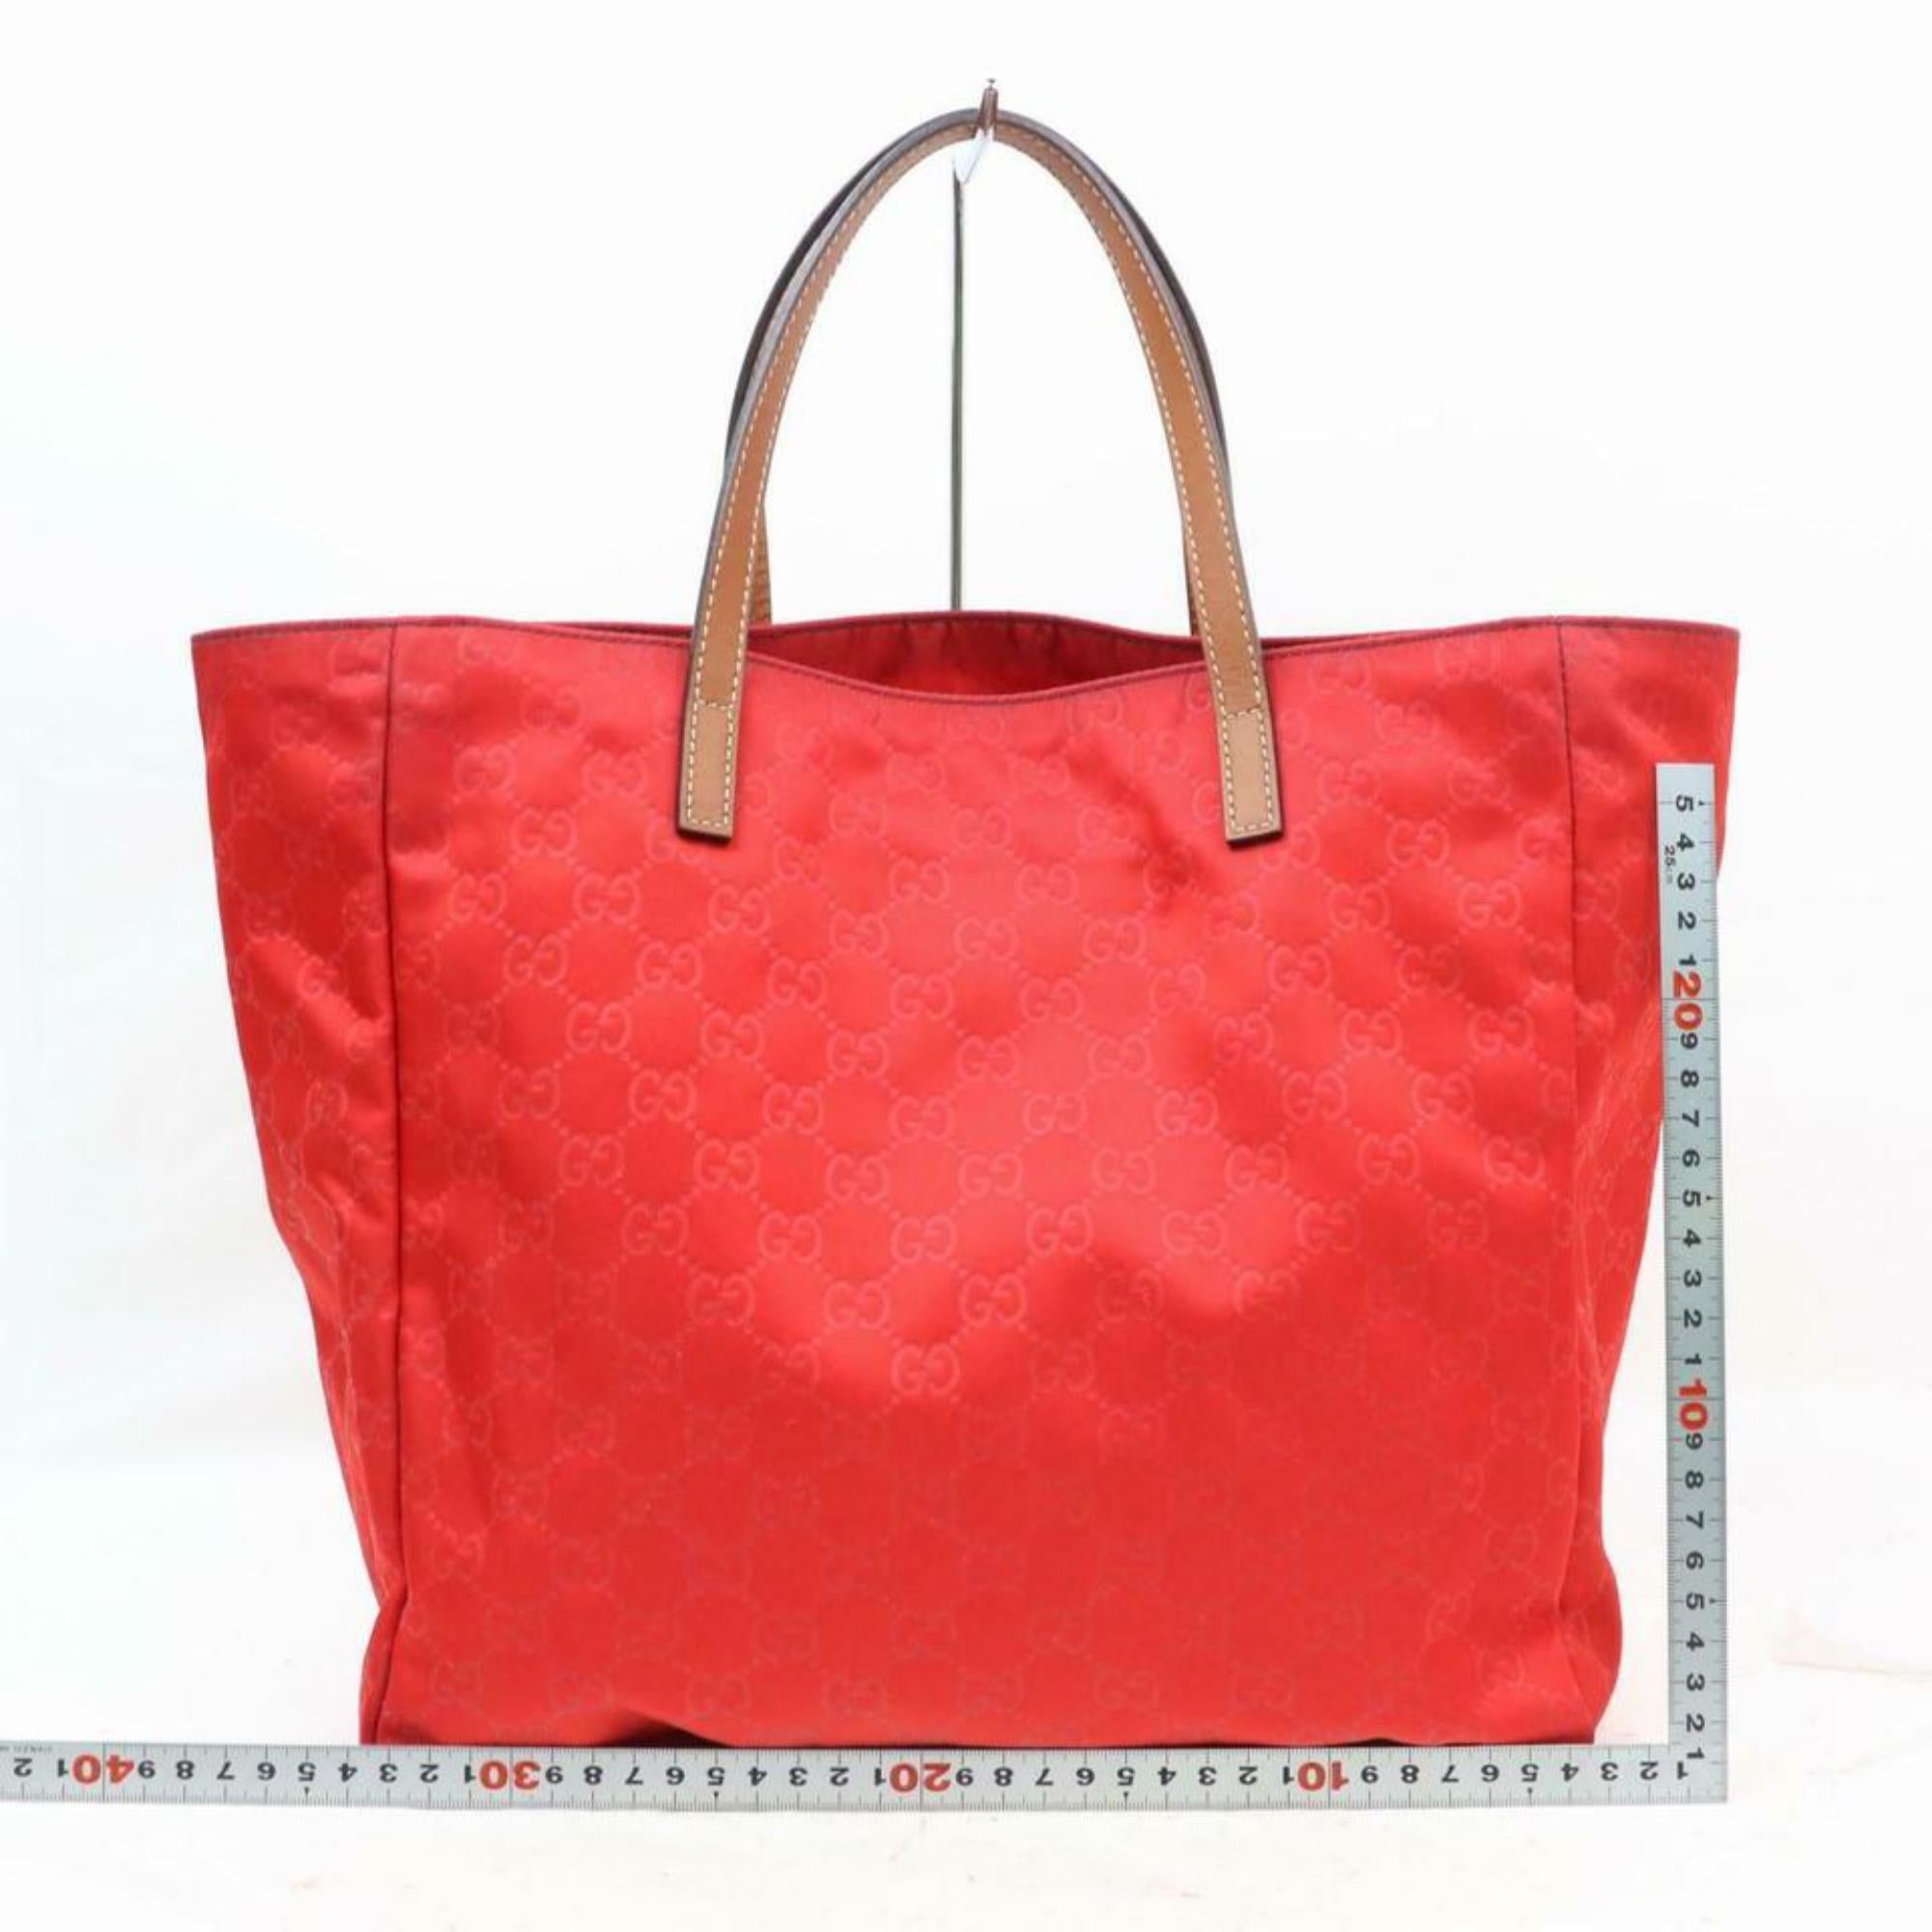 Gucci Large Monogram Embossed Gg Shopper 870349 Red Nylon Tote For Sale 2